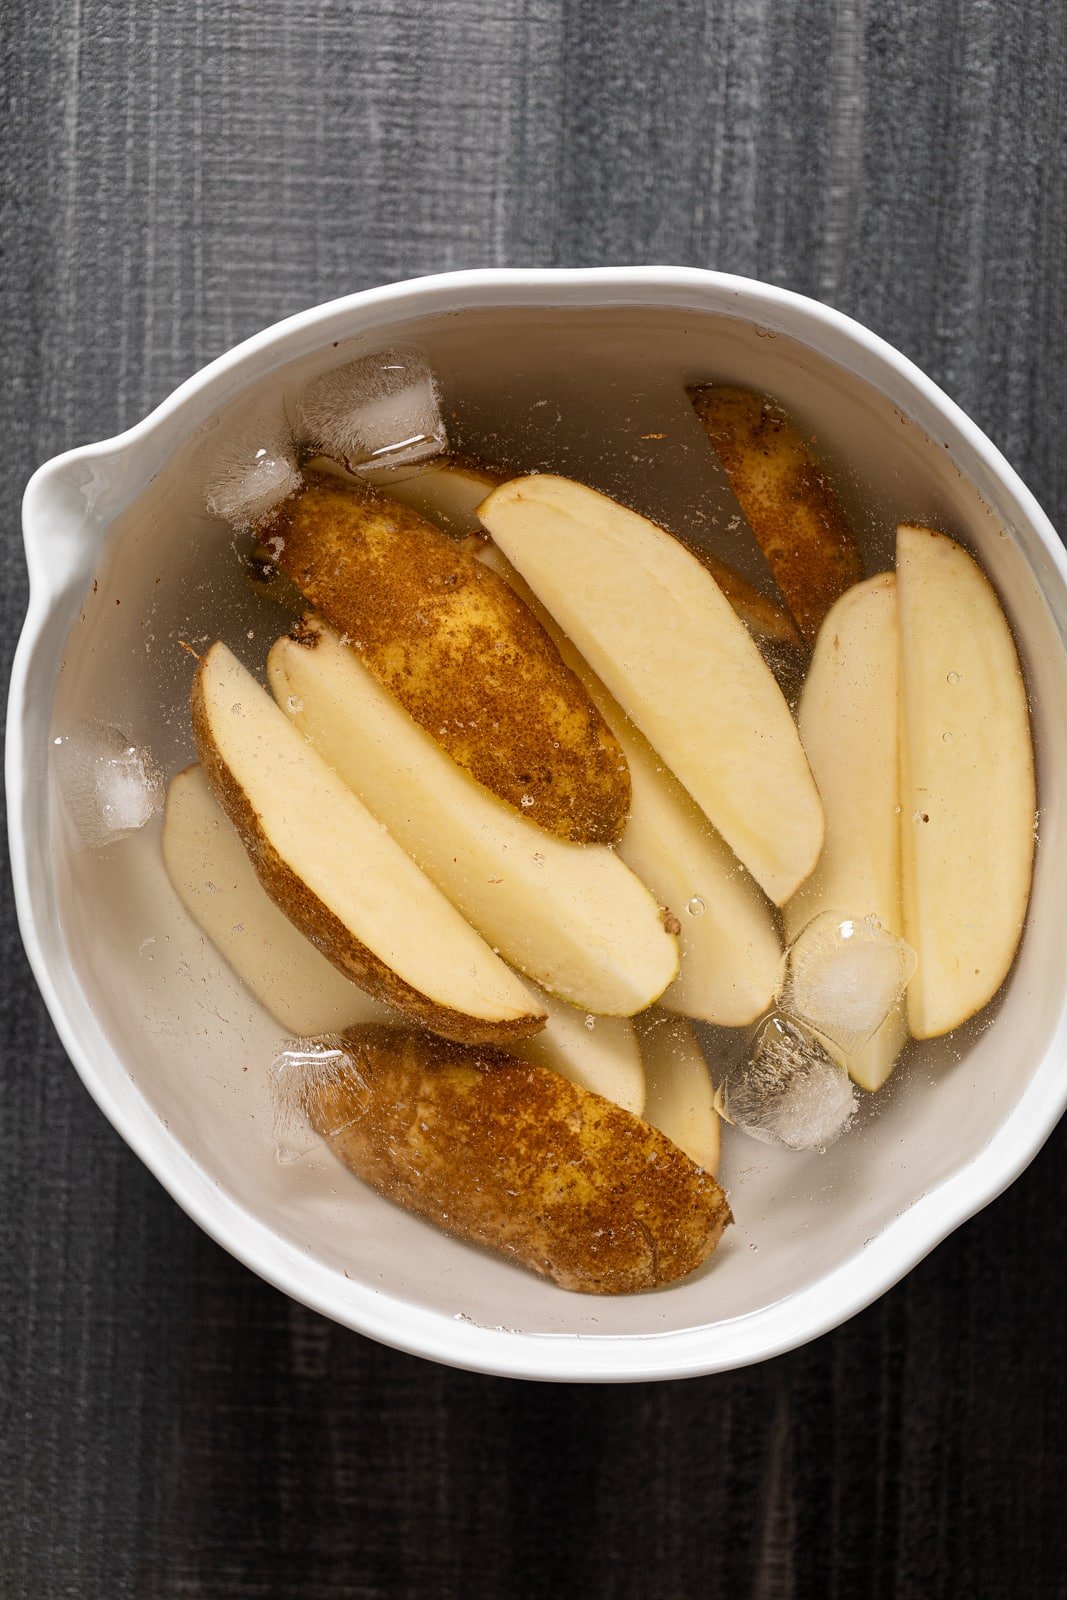 Potato wedges in a bowl of ice water